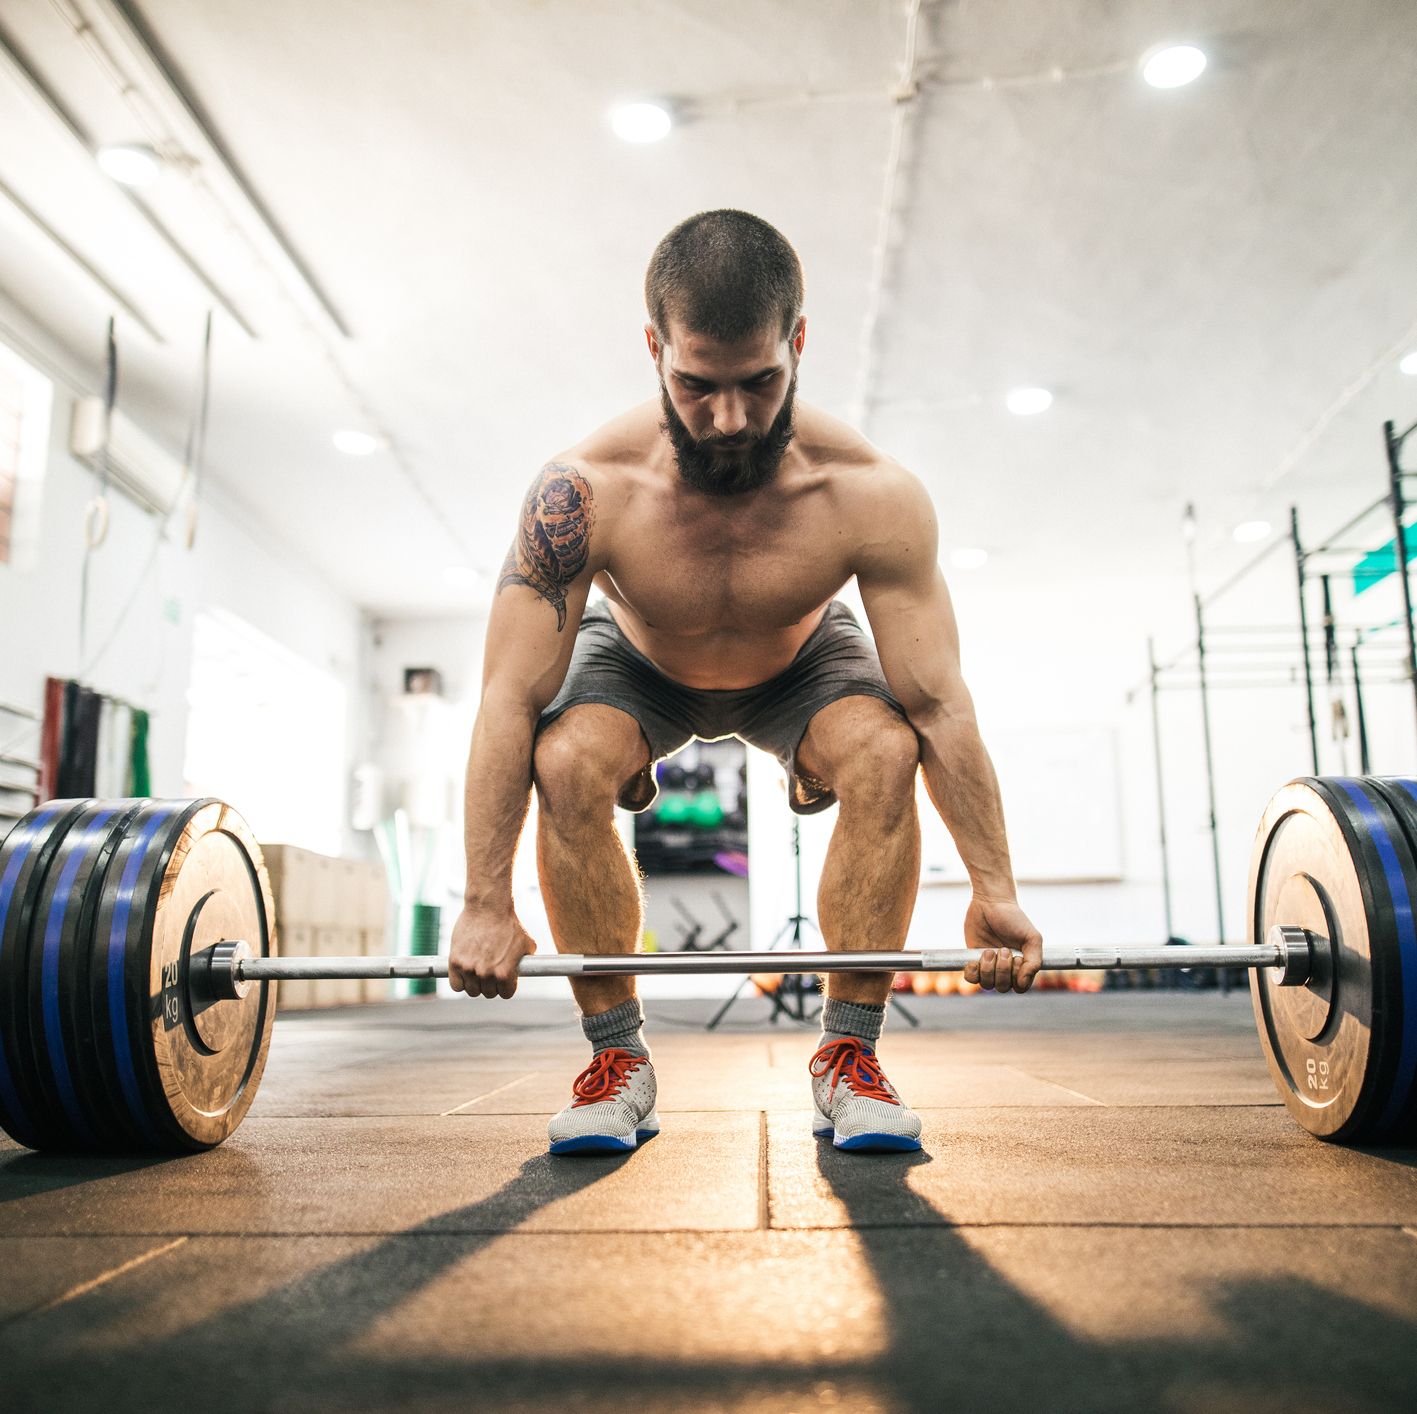 Barbell Deadlifts Are Overrated. Try These Exercises Instead.